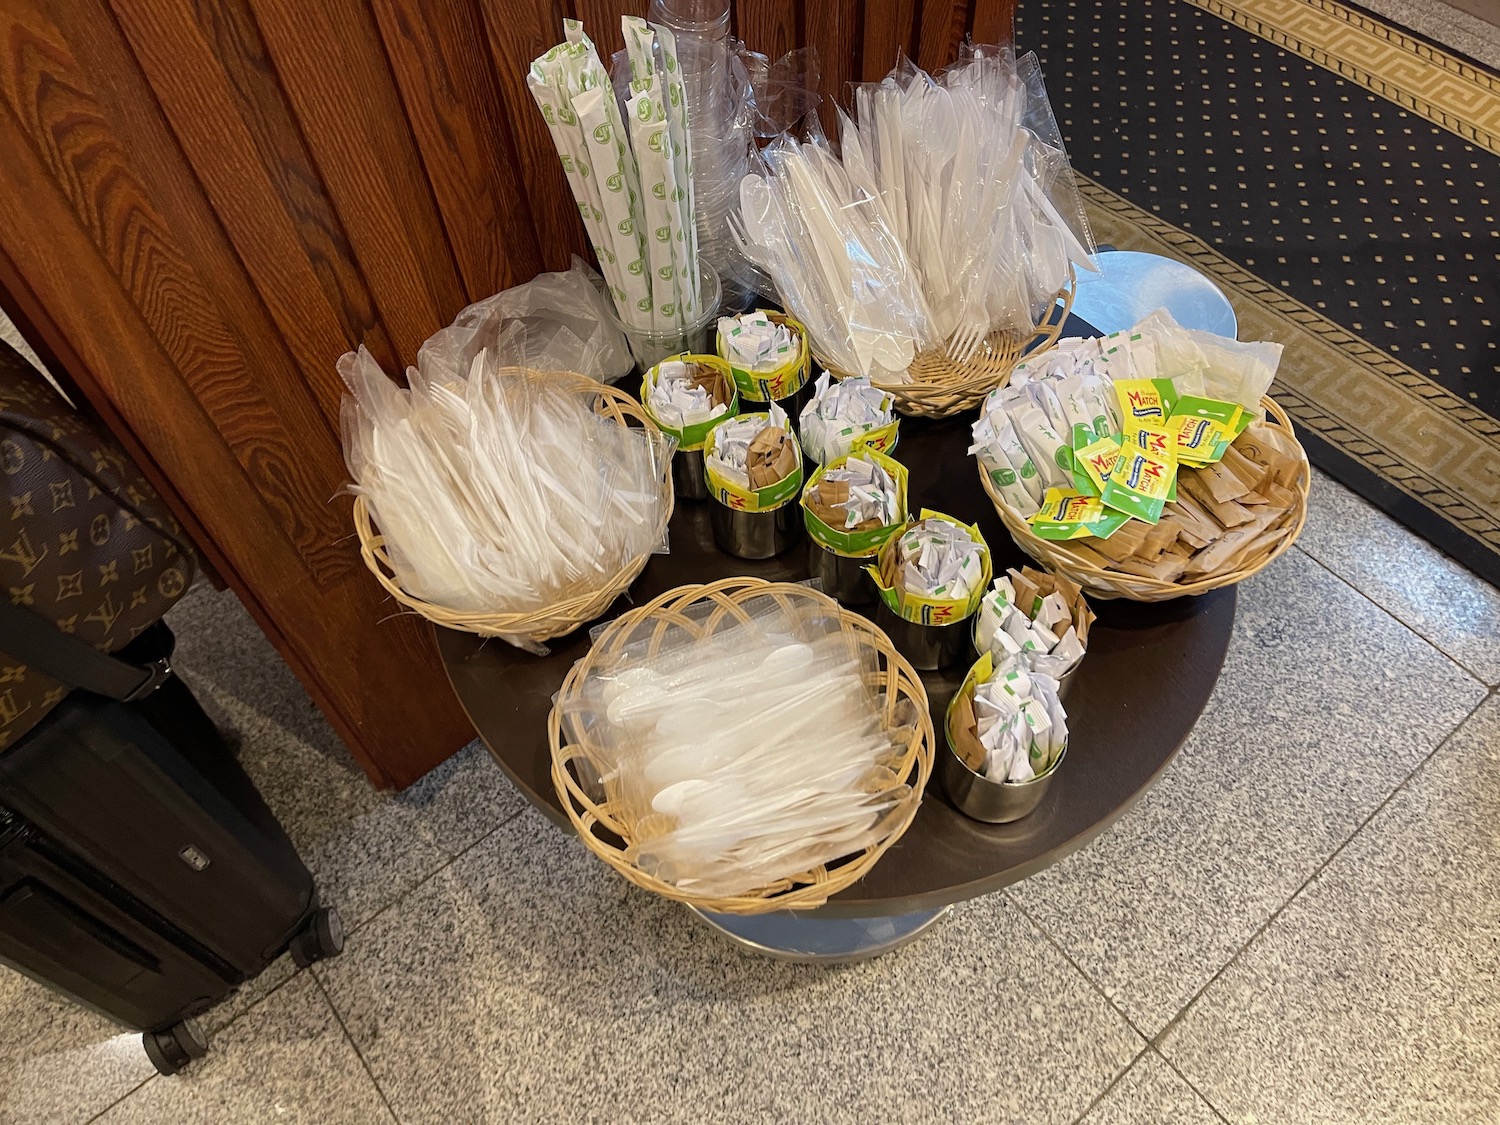 a table with baskets of food and utensils